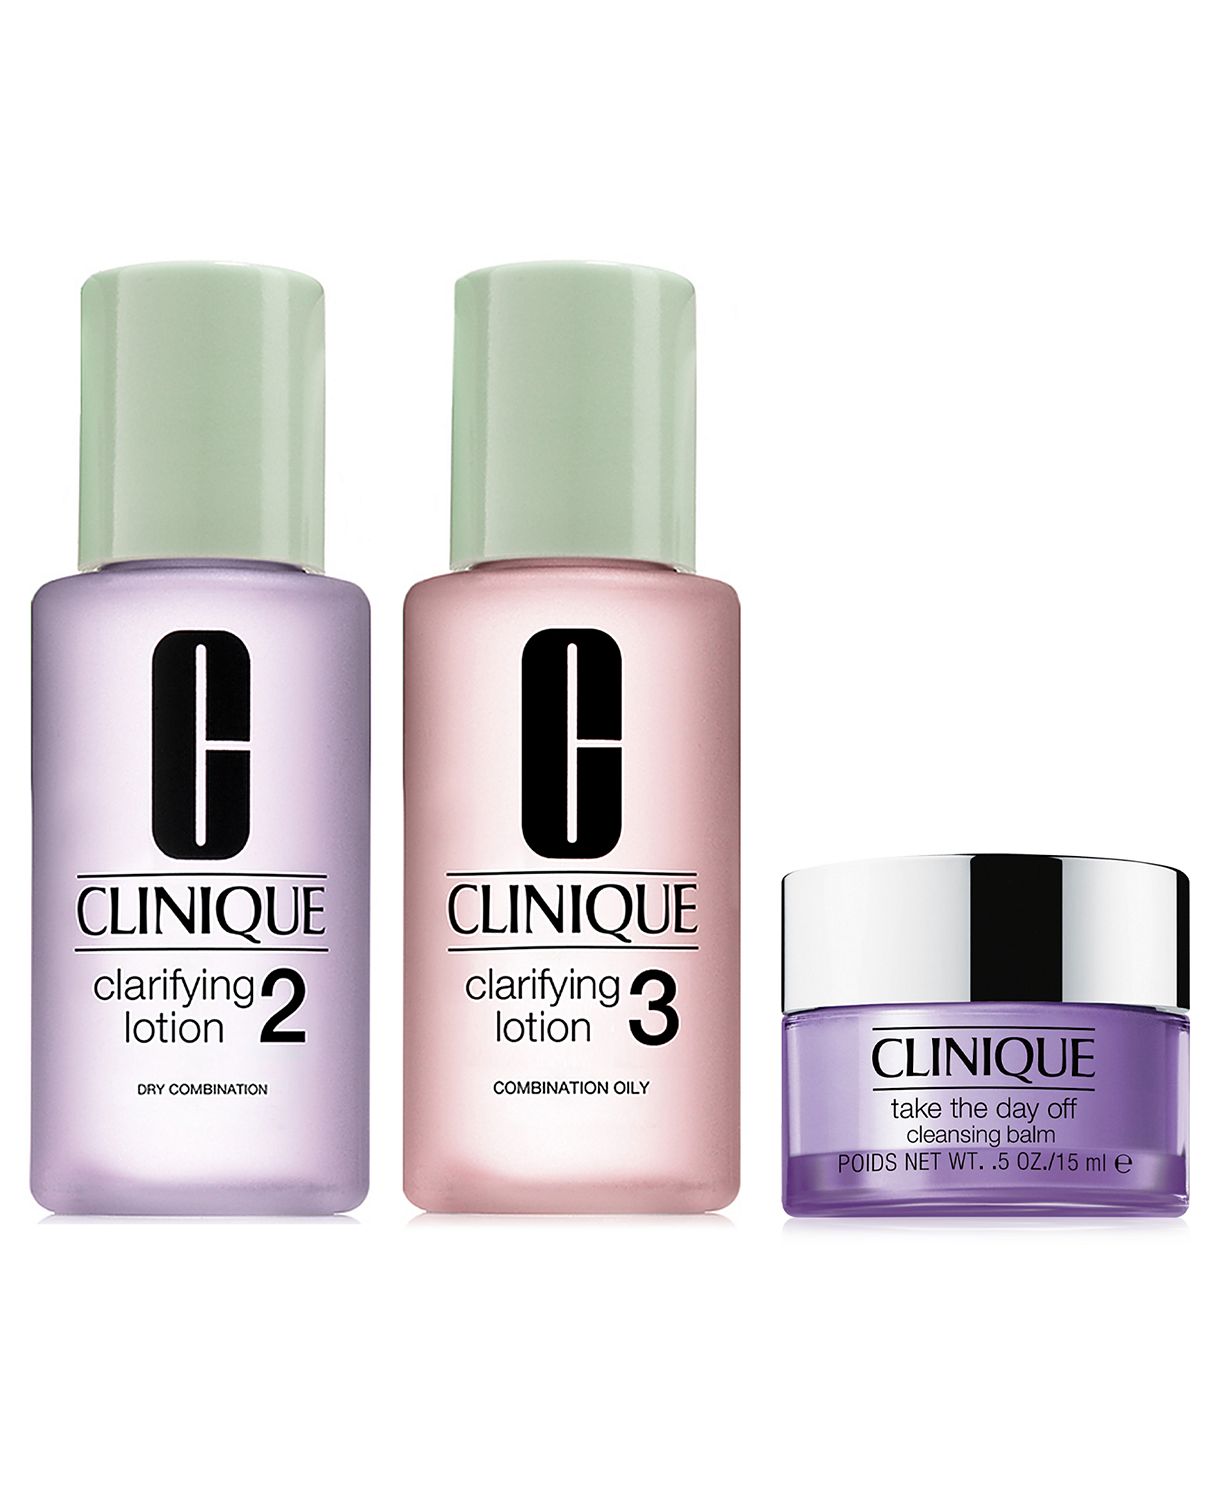 Free Clinique Gift at Macy's Magic Style Shop